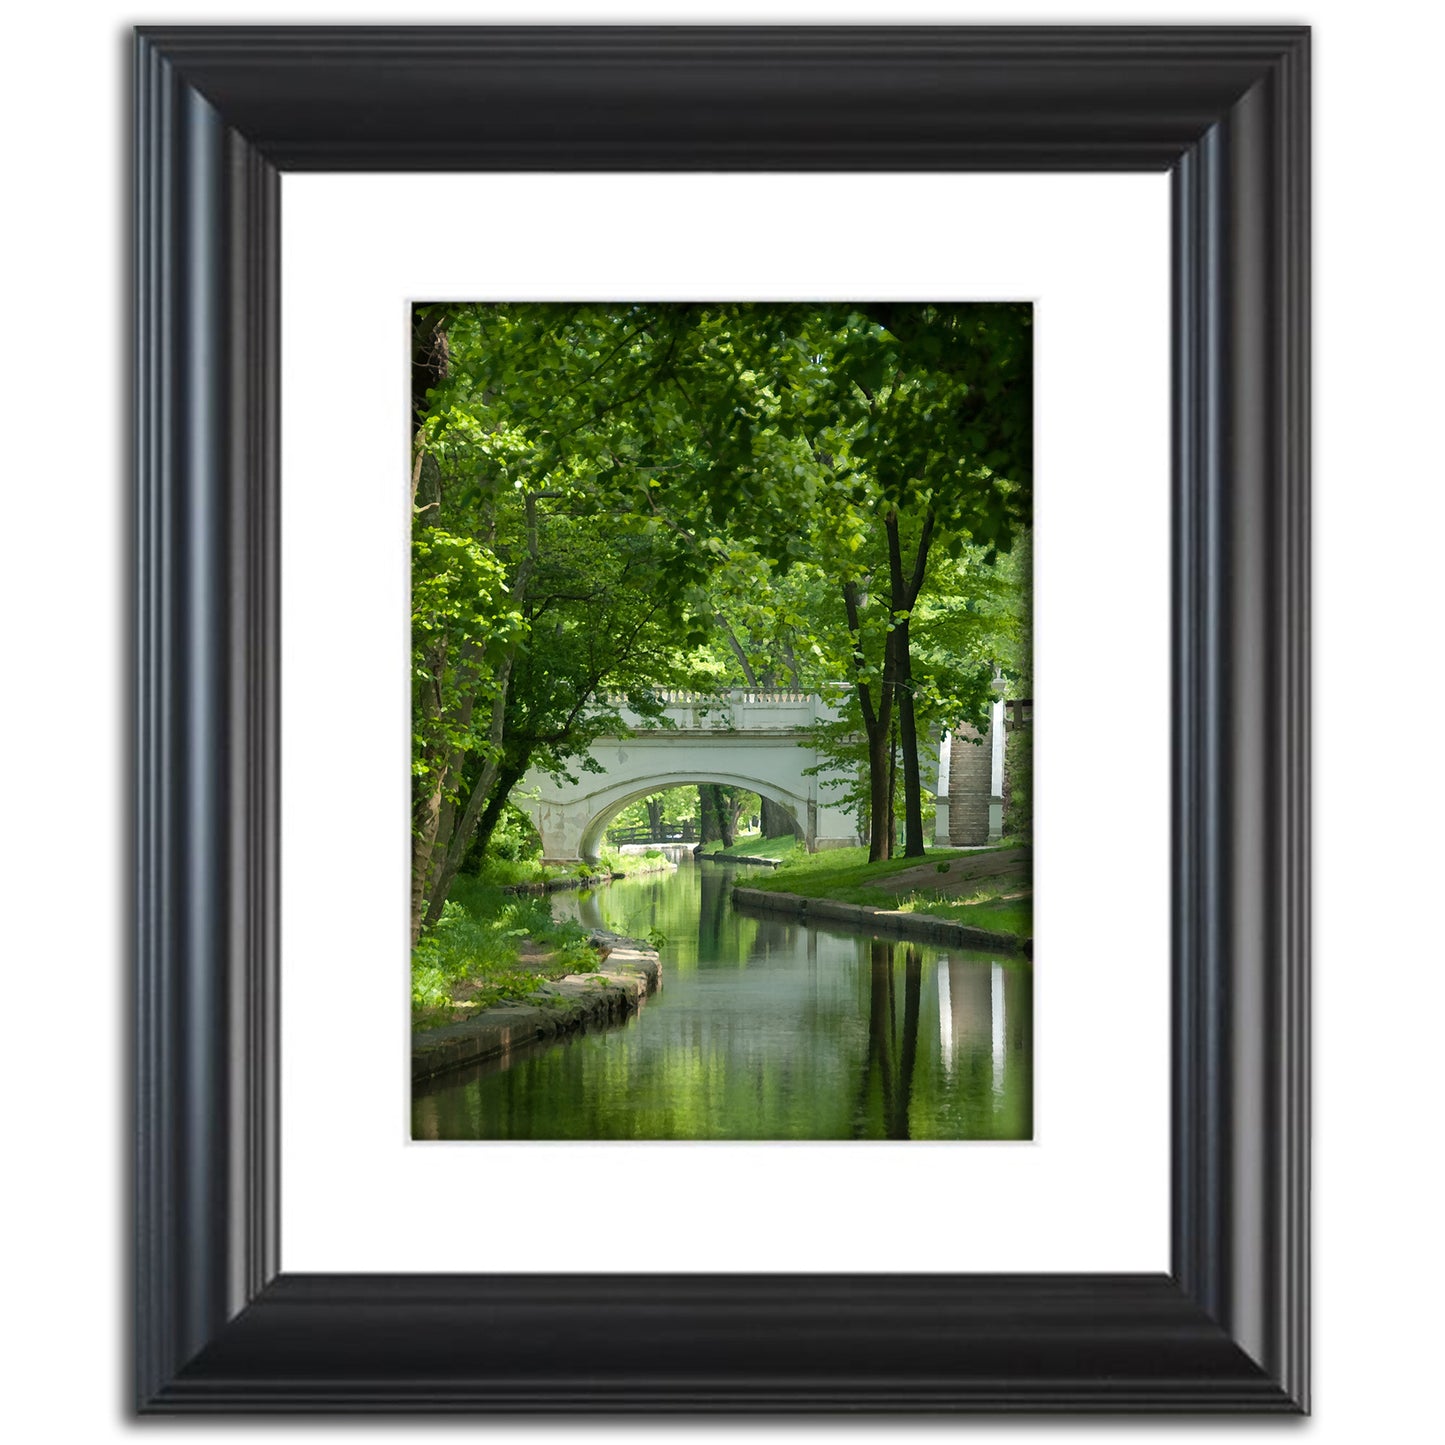 Greenery at Brandywine Abstract Photo Fine Art Canvas & Unframed Wall Art Prints  - PIPAFINEART